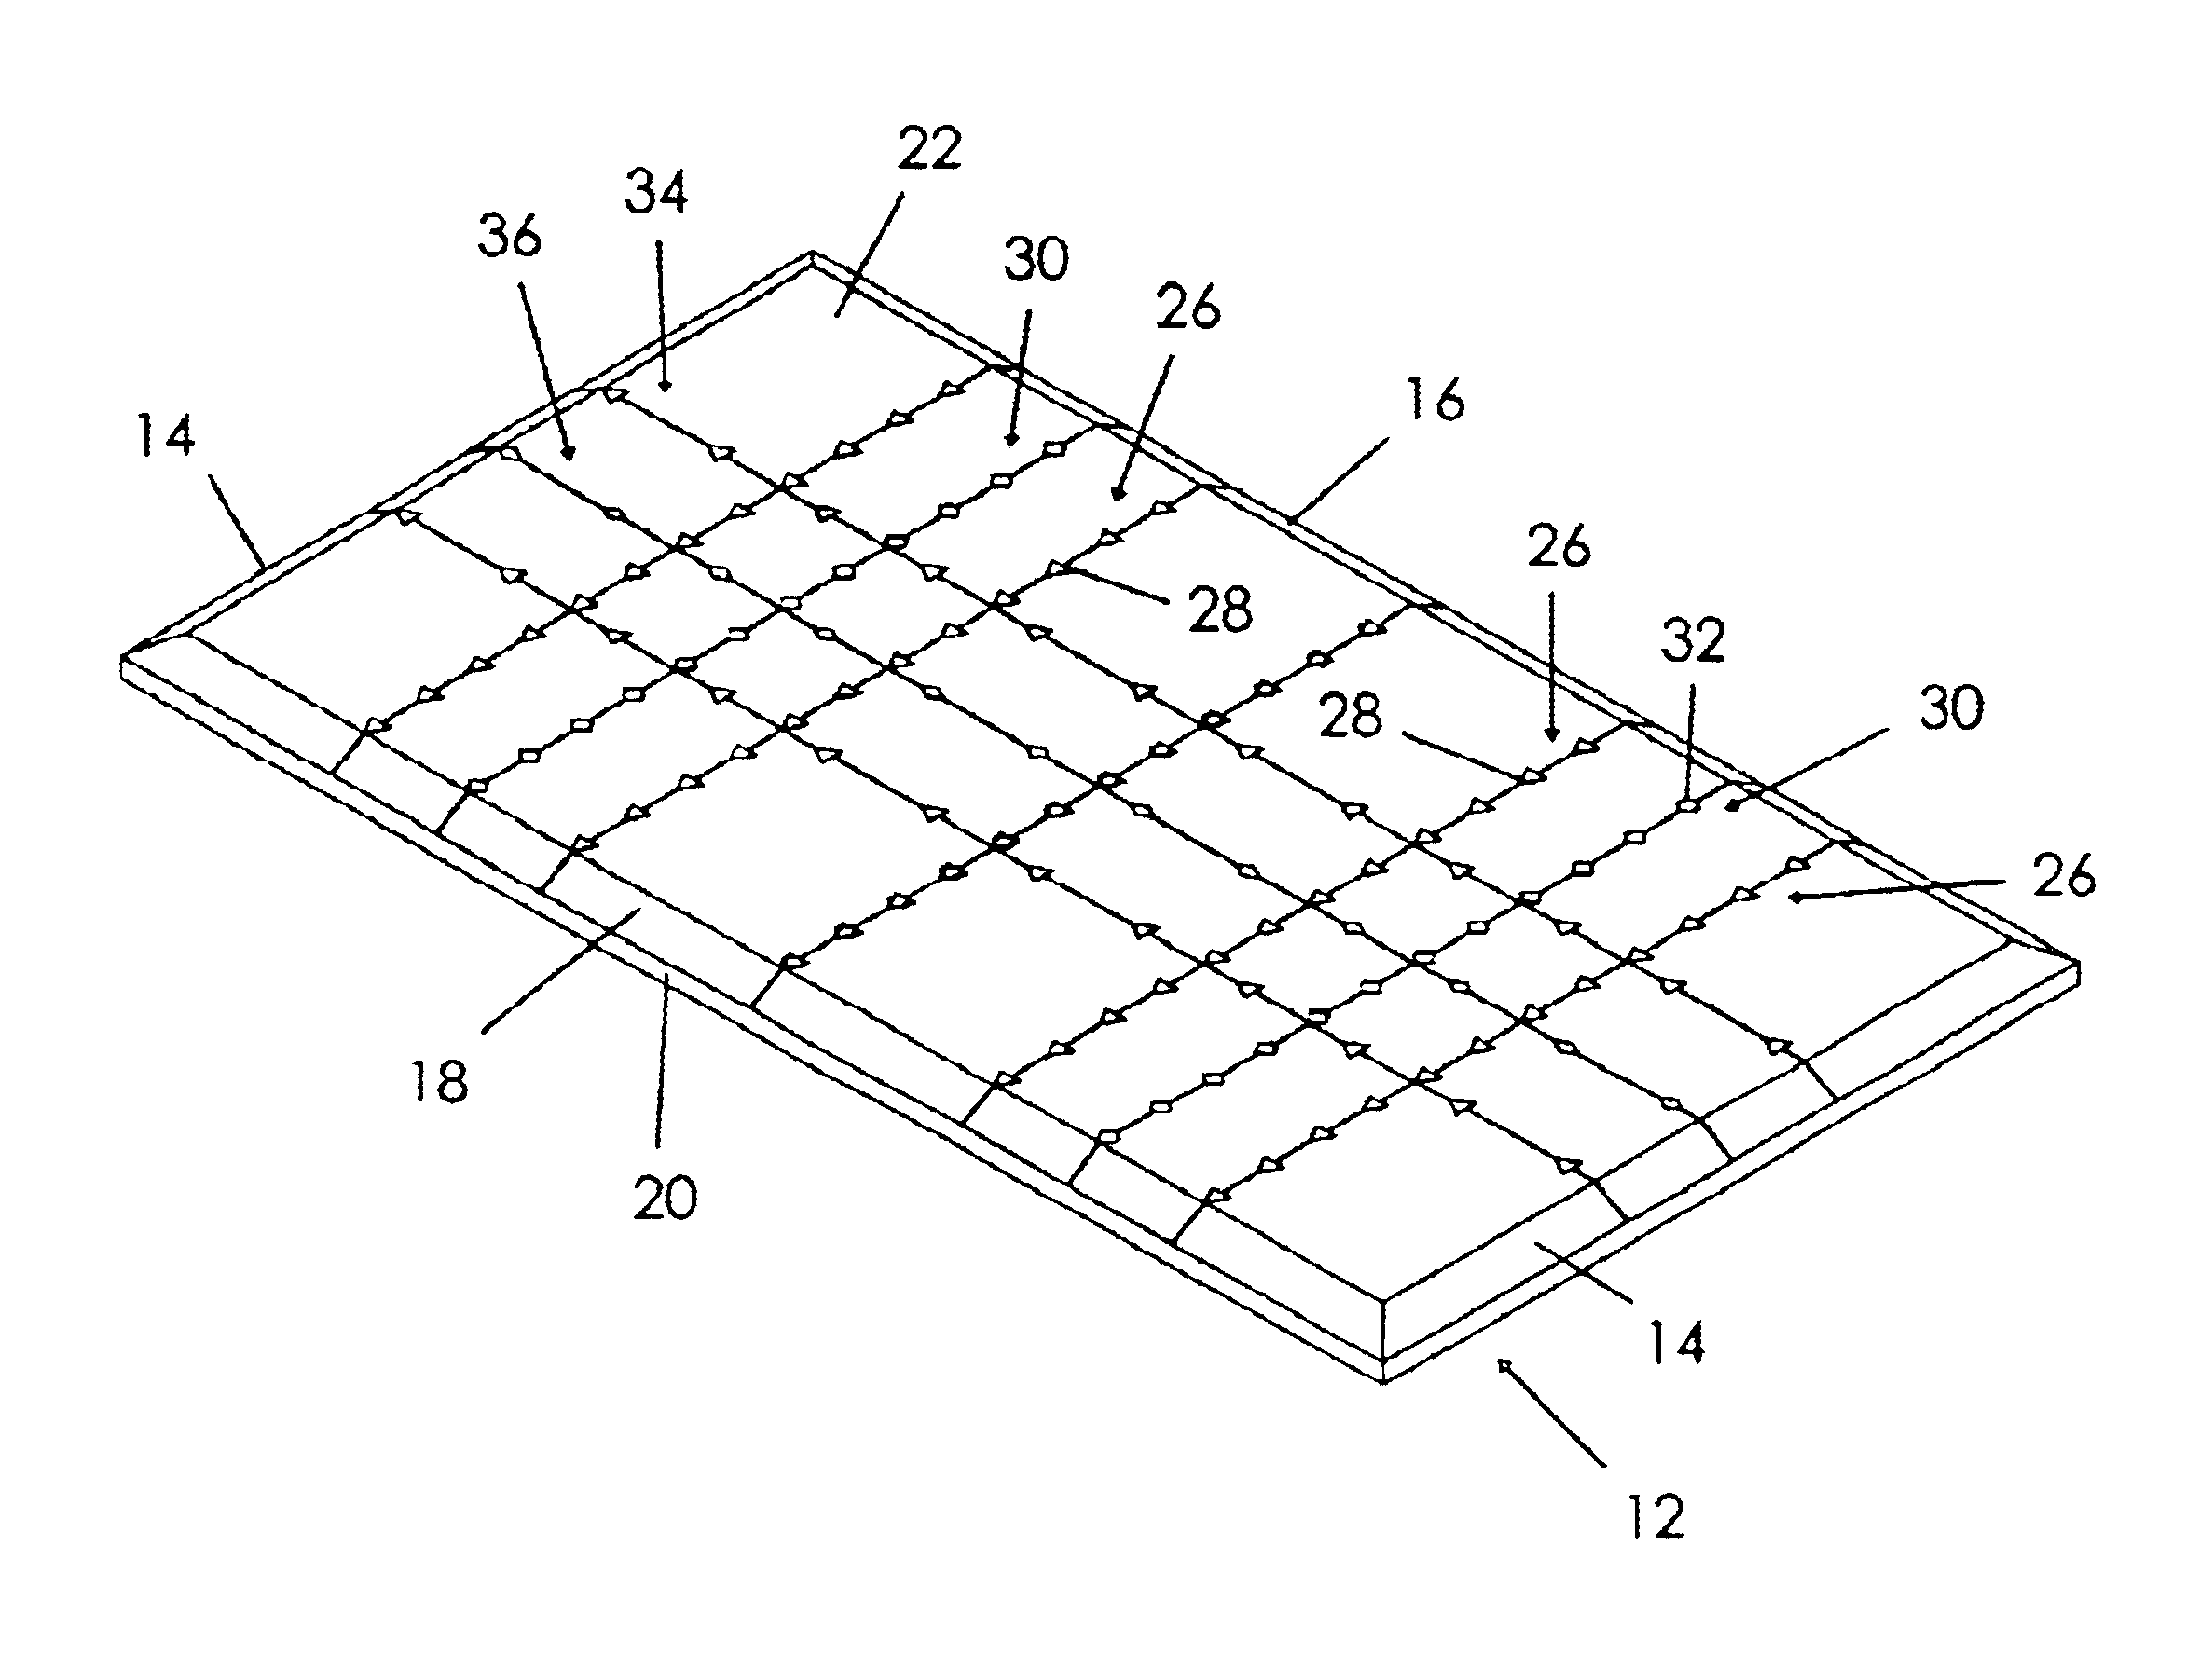 Construction material with multiple stud position indicia